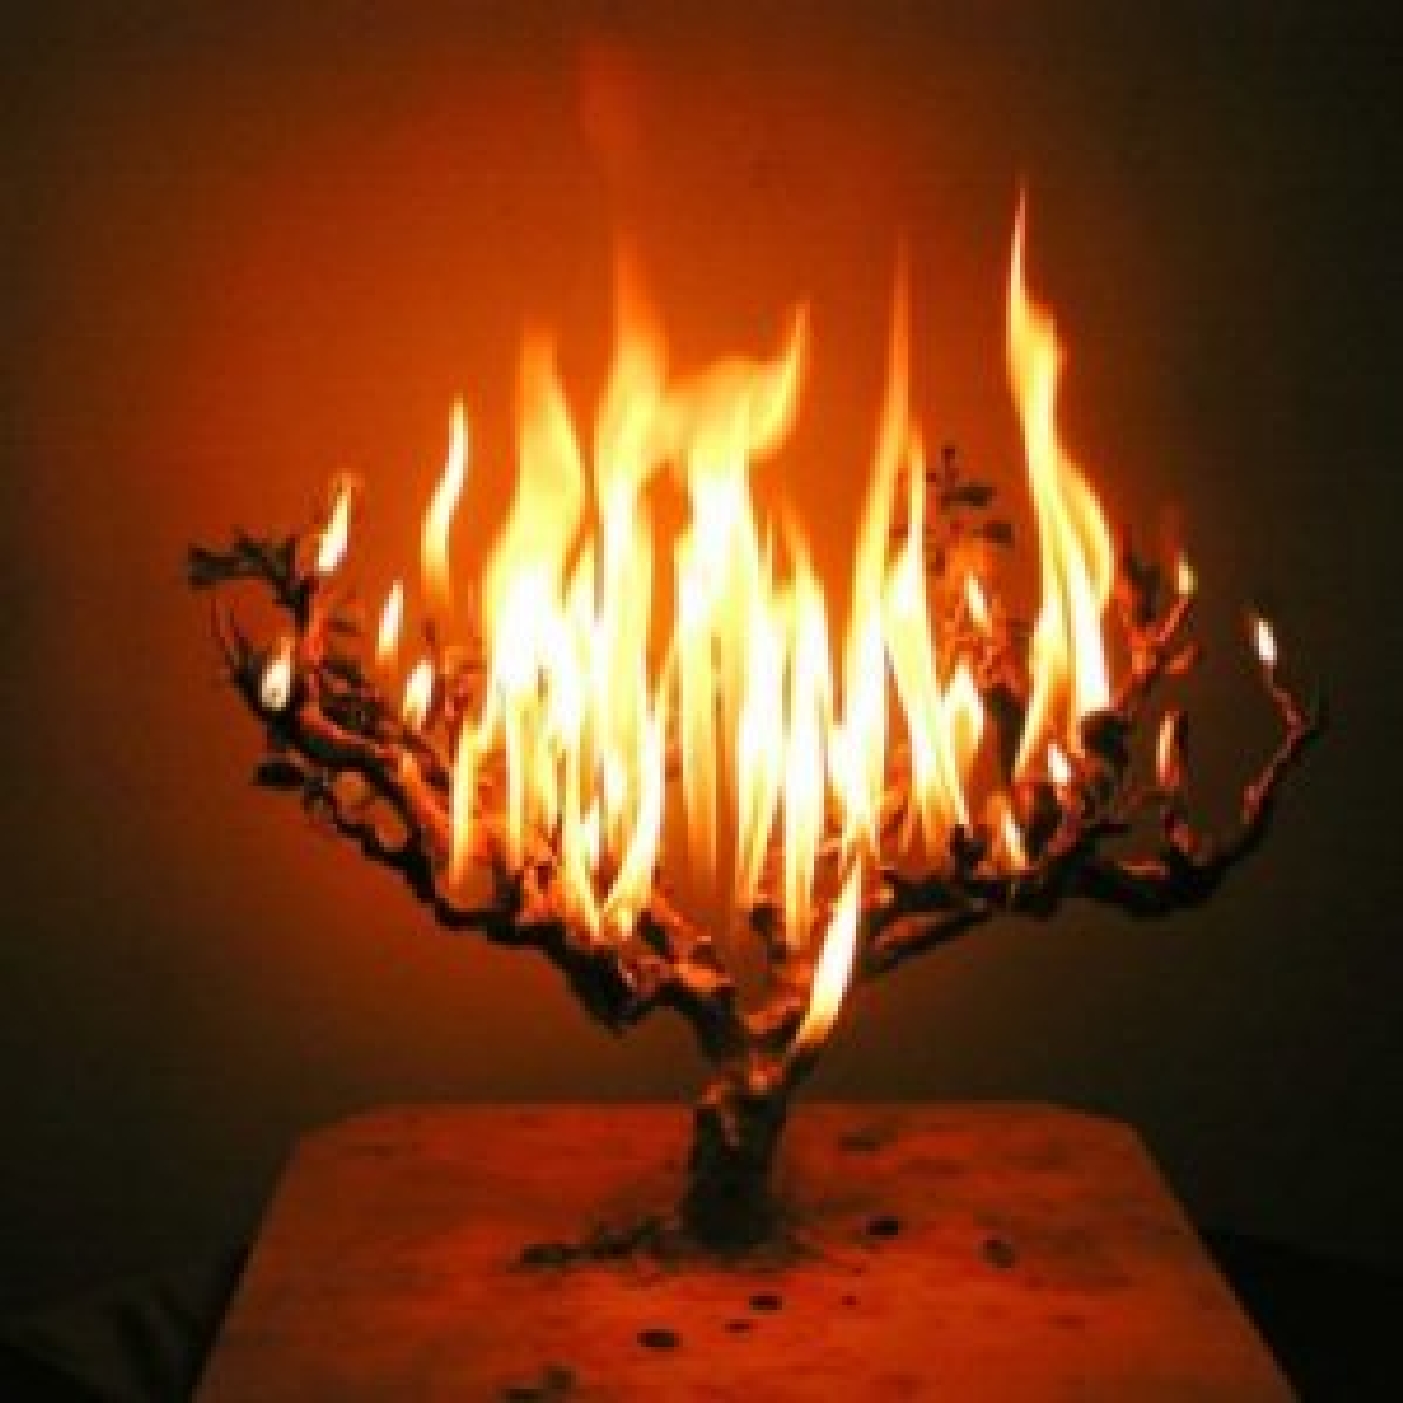 Rischa D'Araisa-Season 8-Episode 17-Ugly Insulation-Trying to Comprehend Rav Dov Landau's Refusal to Allow Bnei Torah to Visit the Wounded and Attend the Funerals for the Fallen